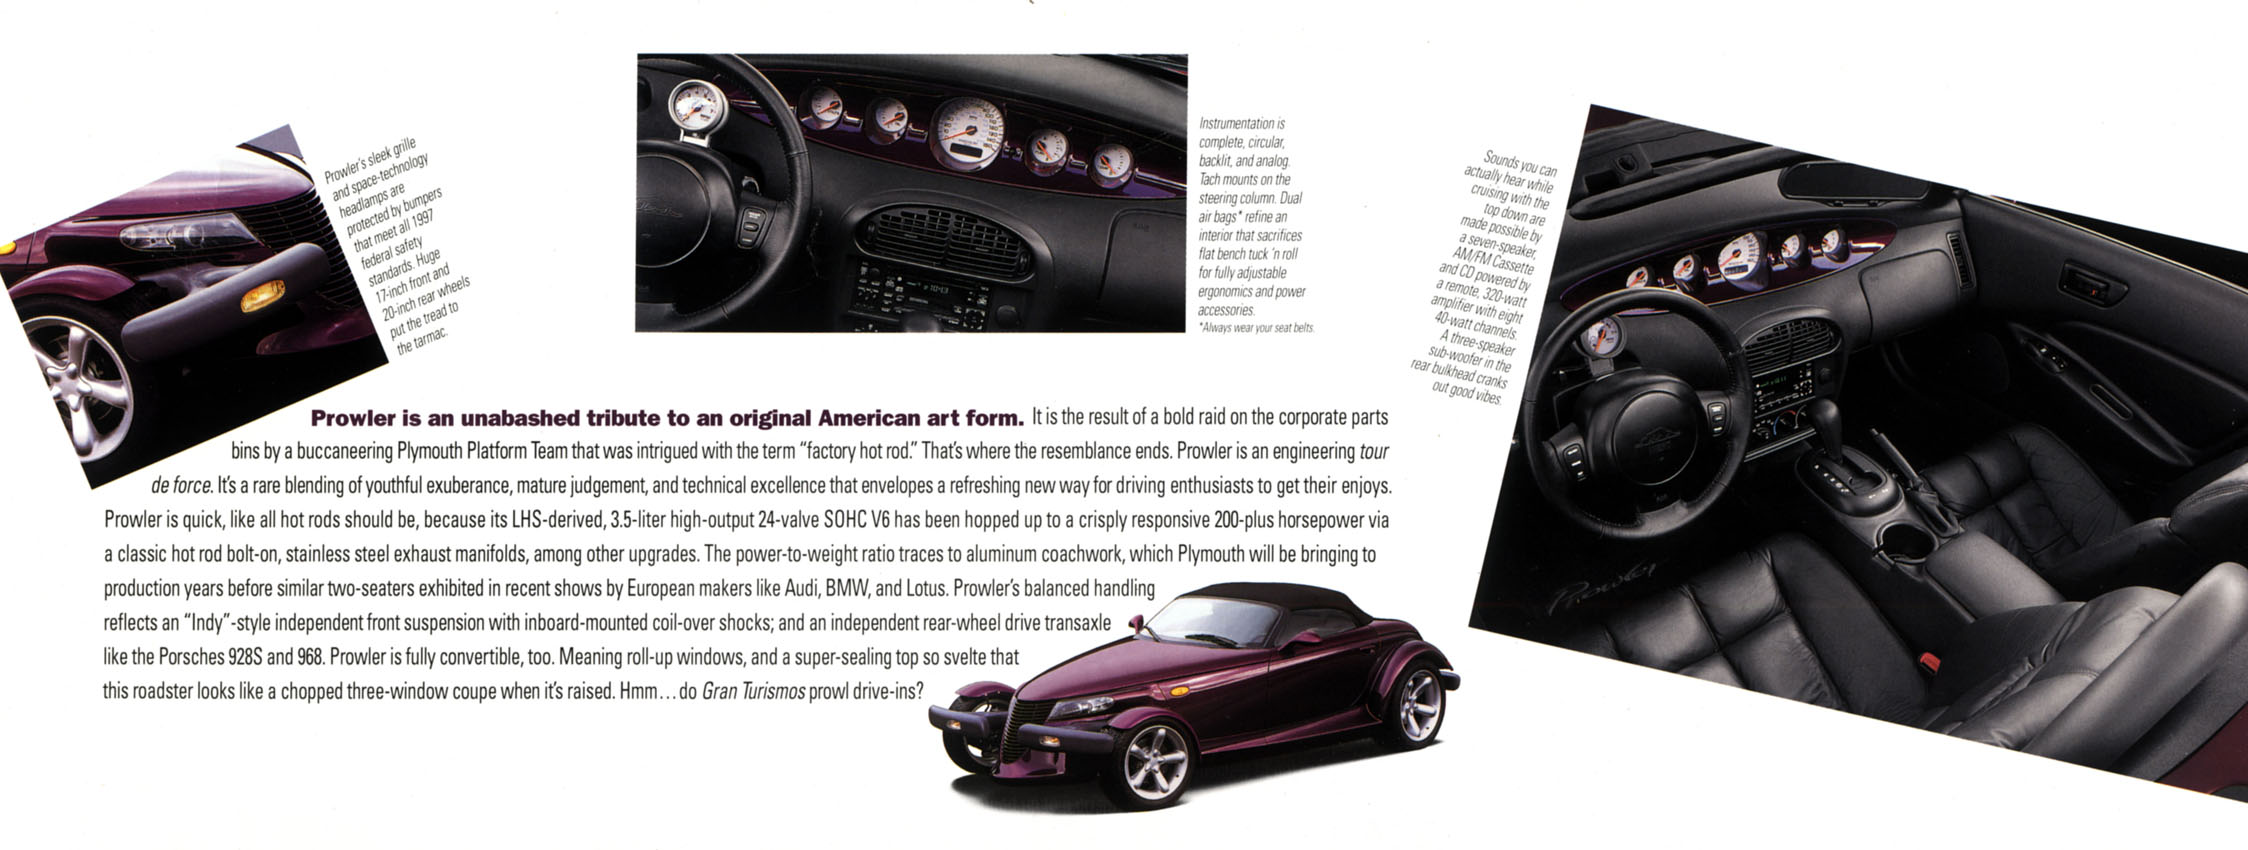 1997_Plymouth_Prowler-03